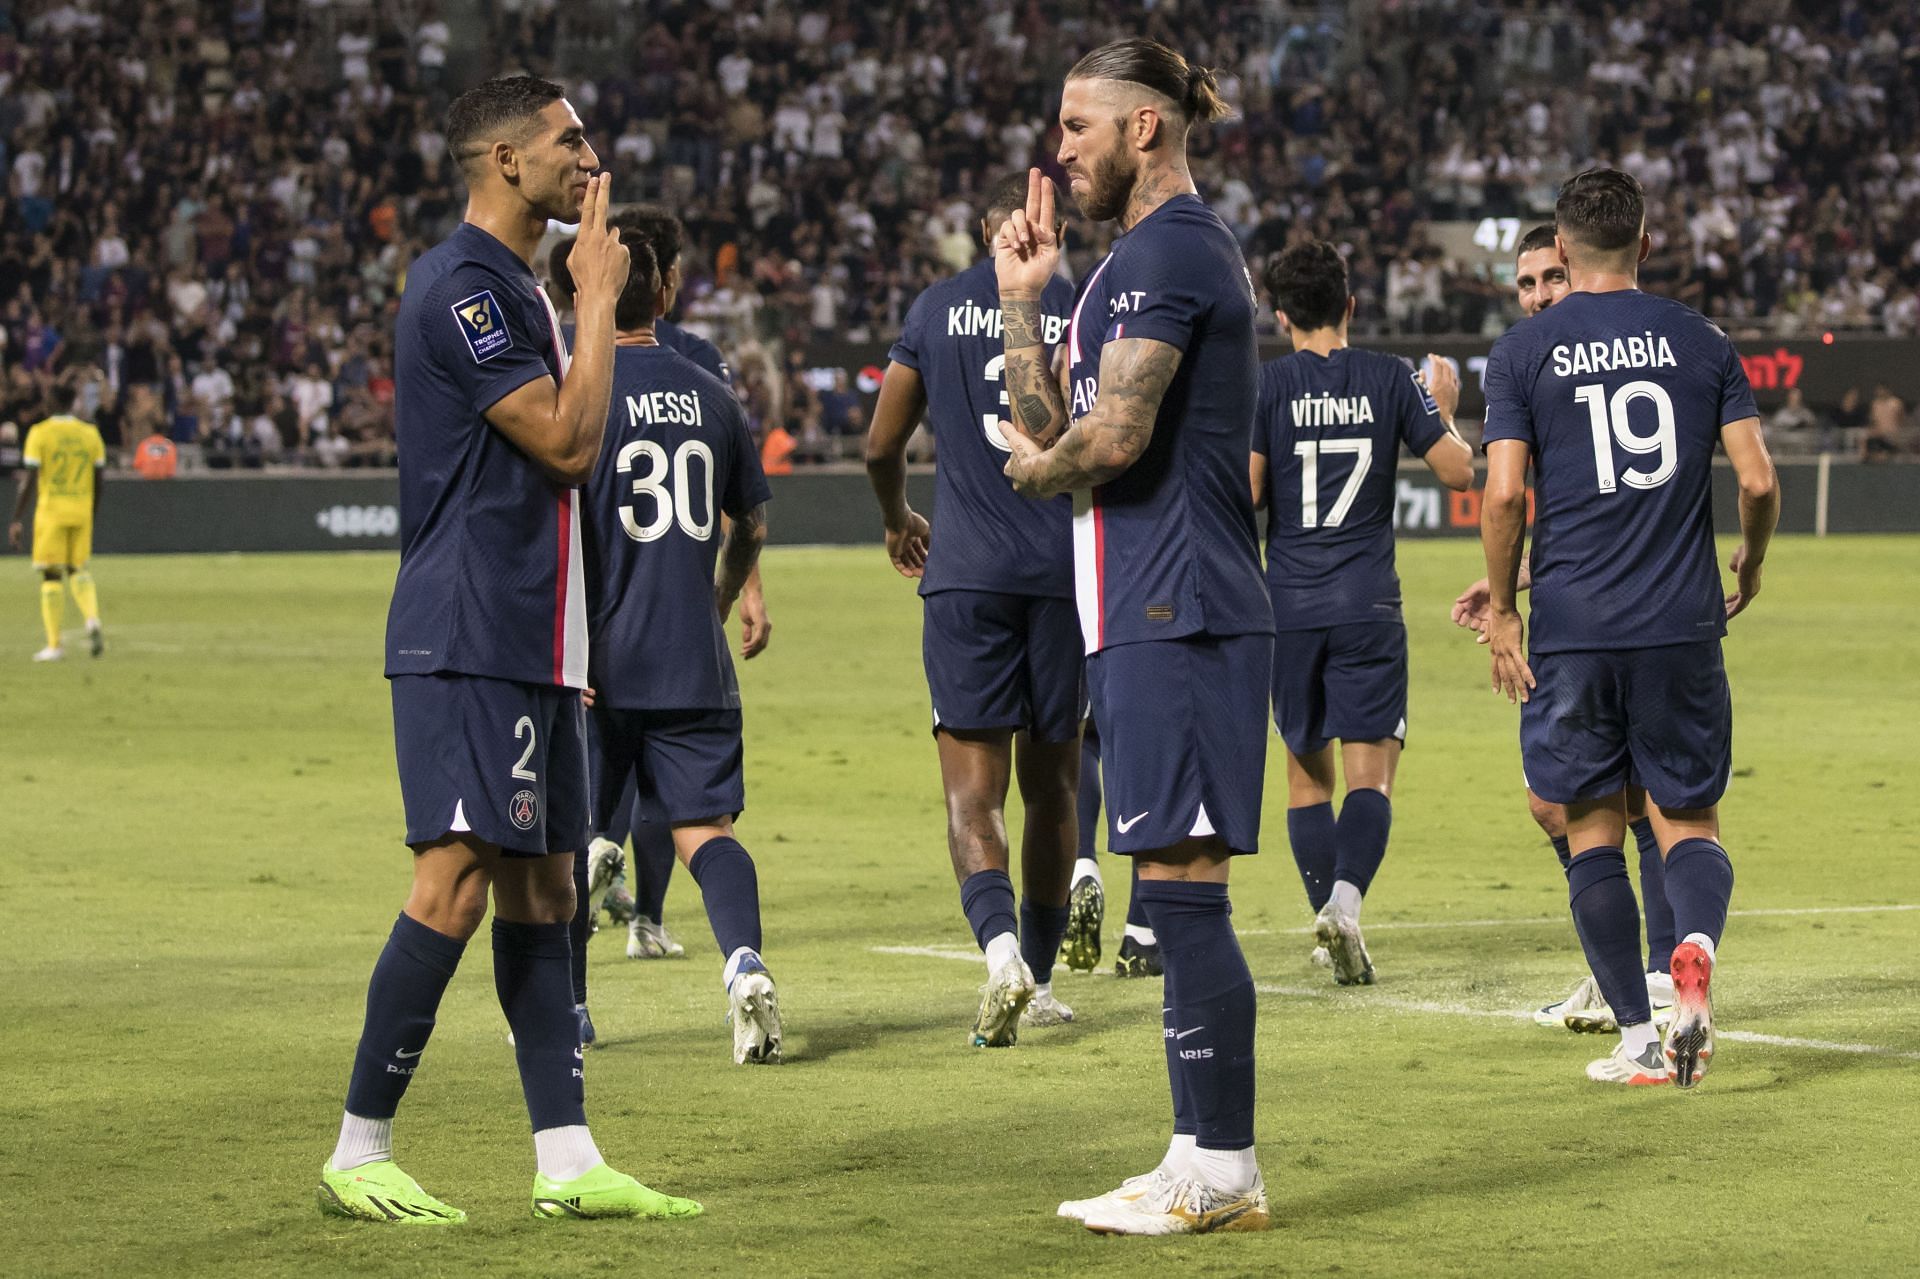 PSG have a point to prove this season